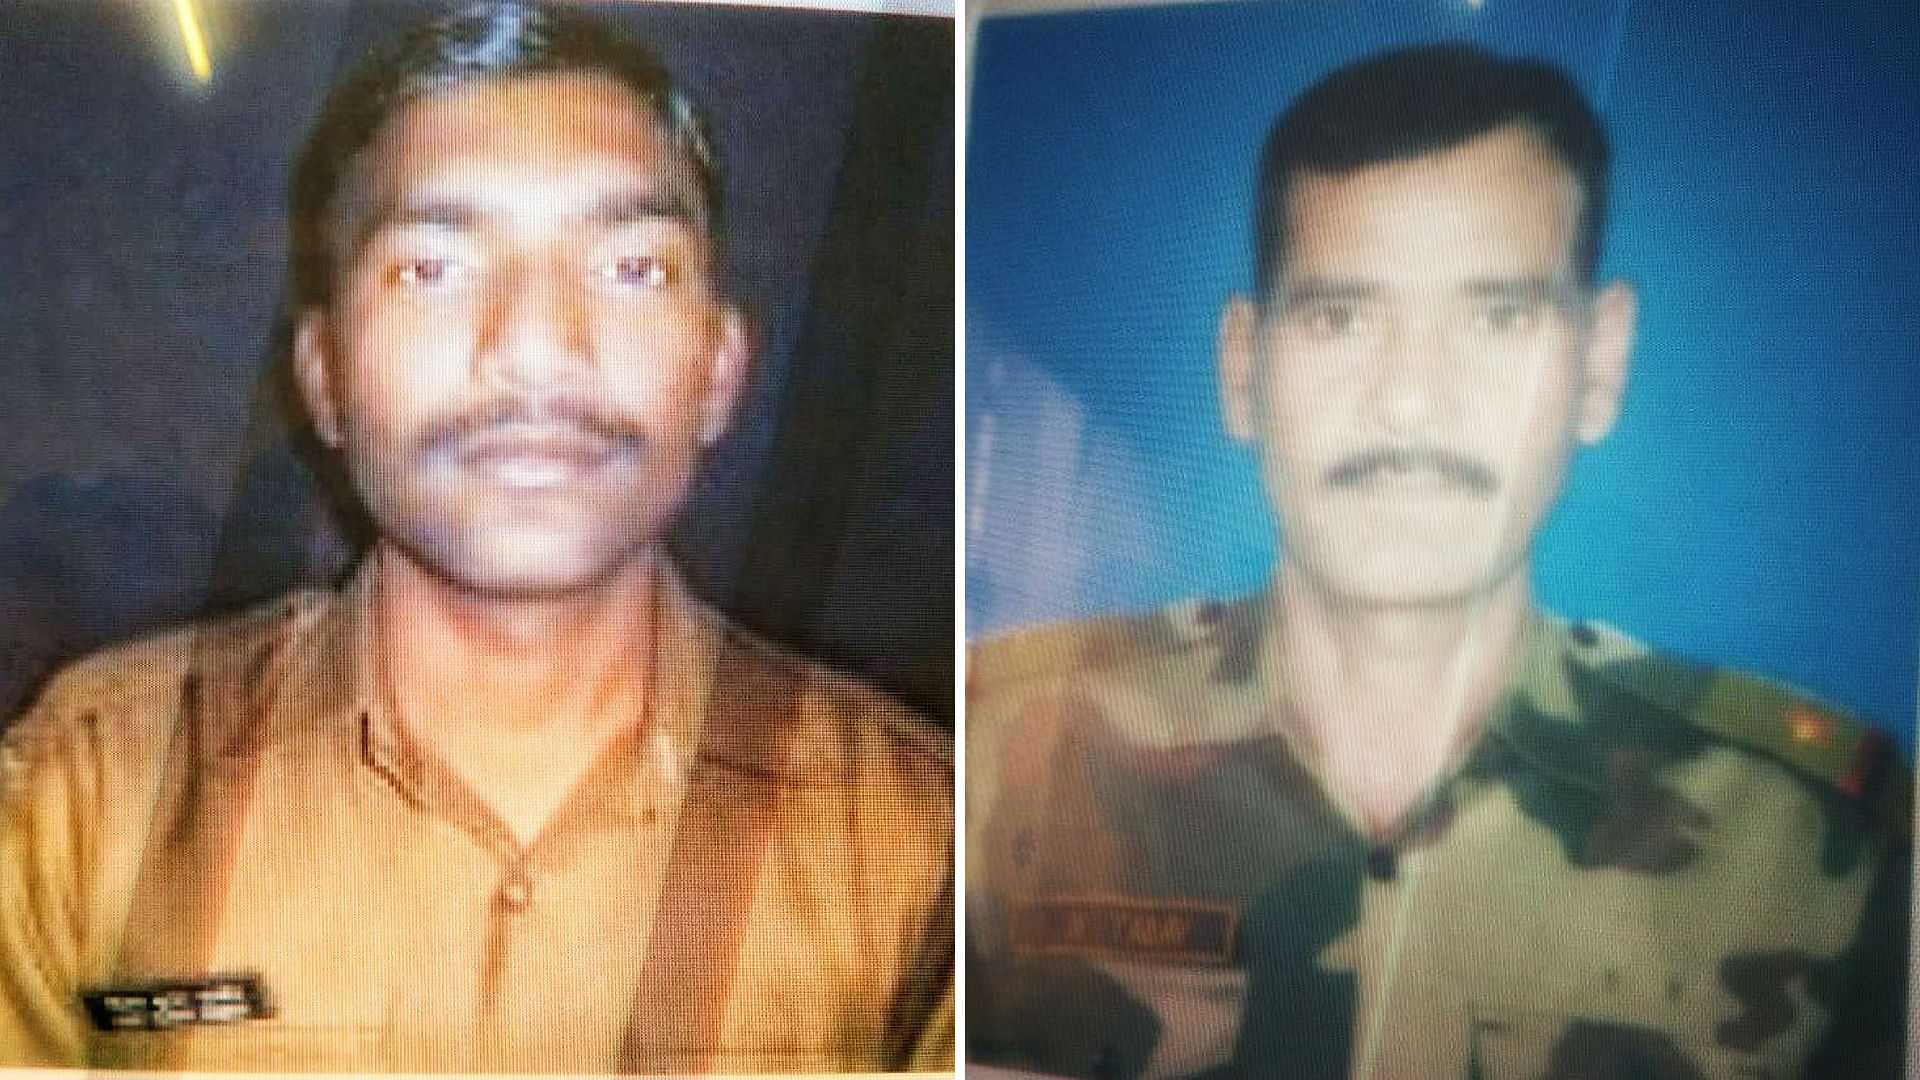 BSF’s Constable Vijay Kumar Pandey and ASI Satya Narayan Yadav, succumbed to there injuries they had sustained in the cross-border.